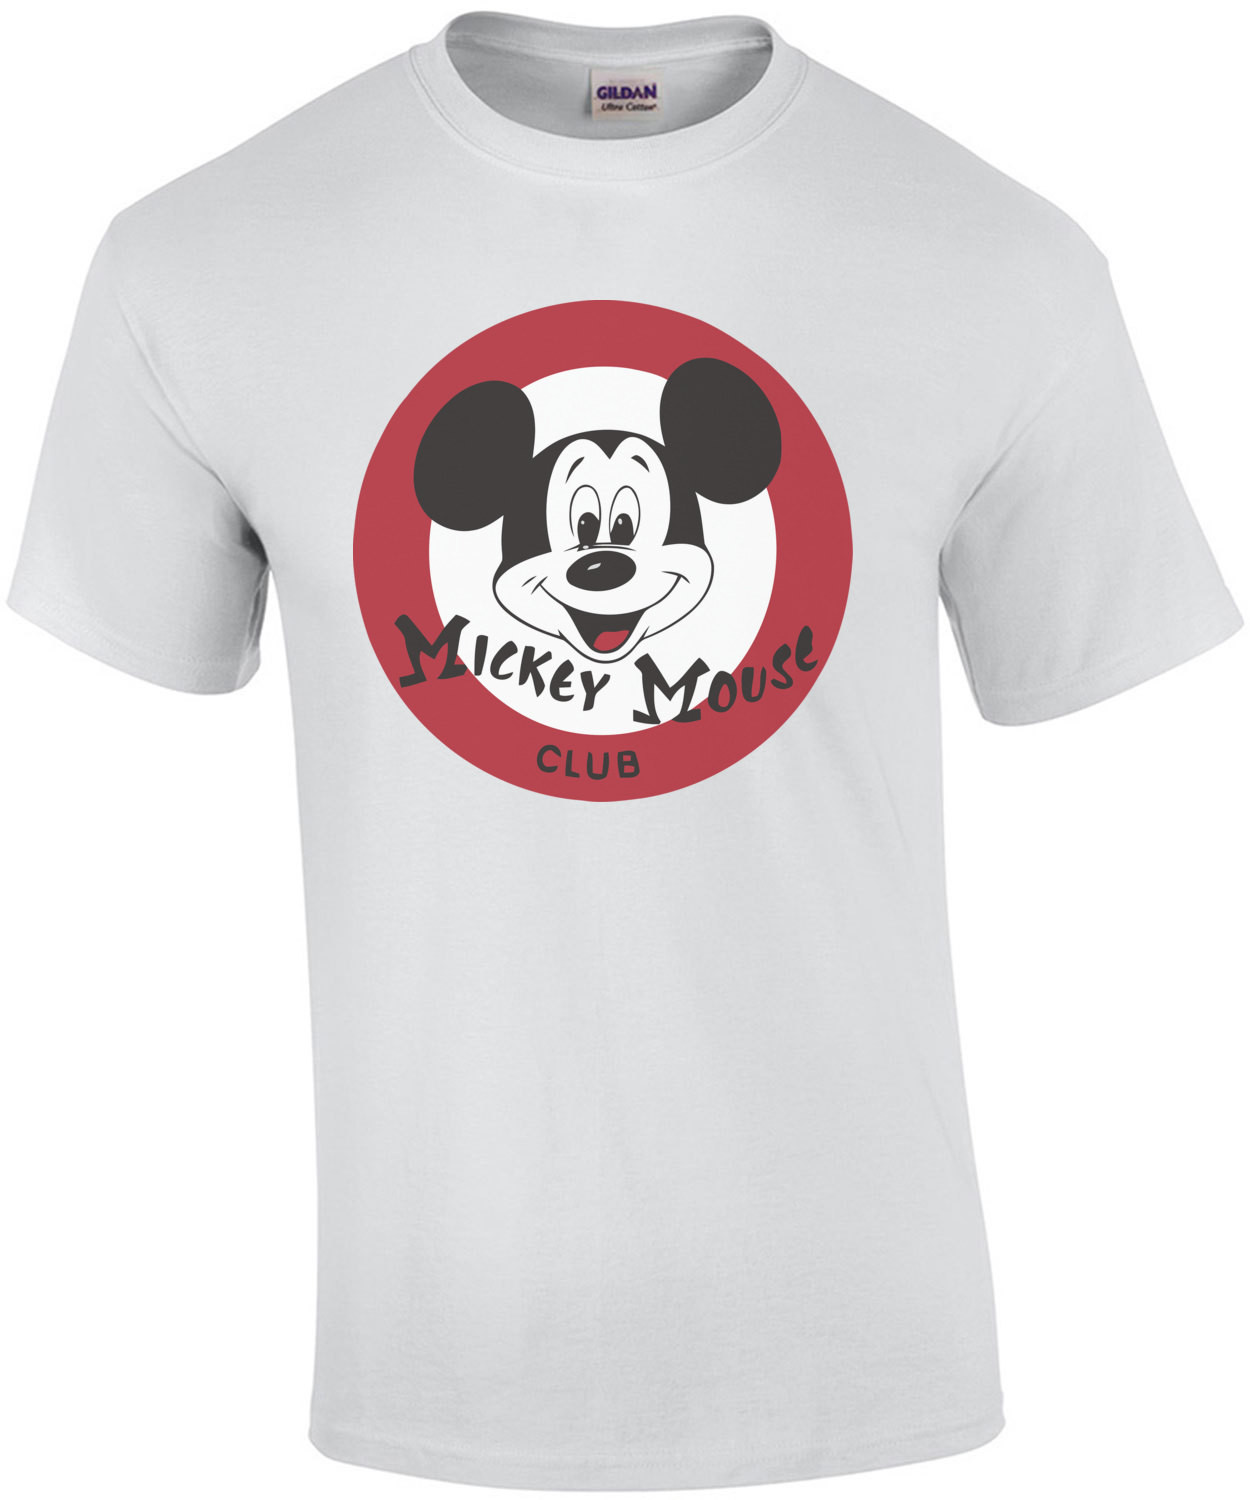 The Mickey Mouse Club Kid's T-shirt